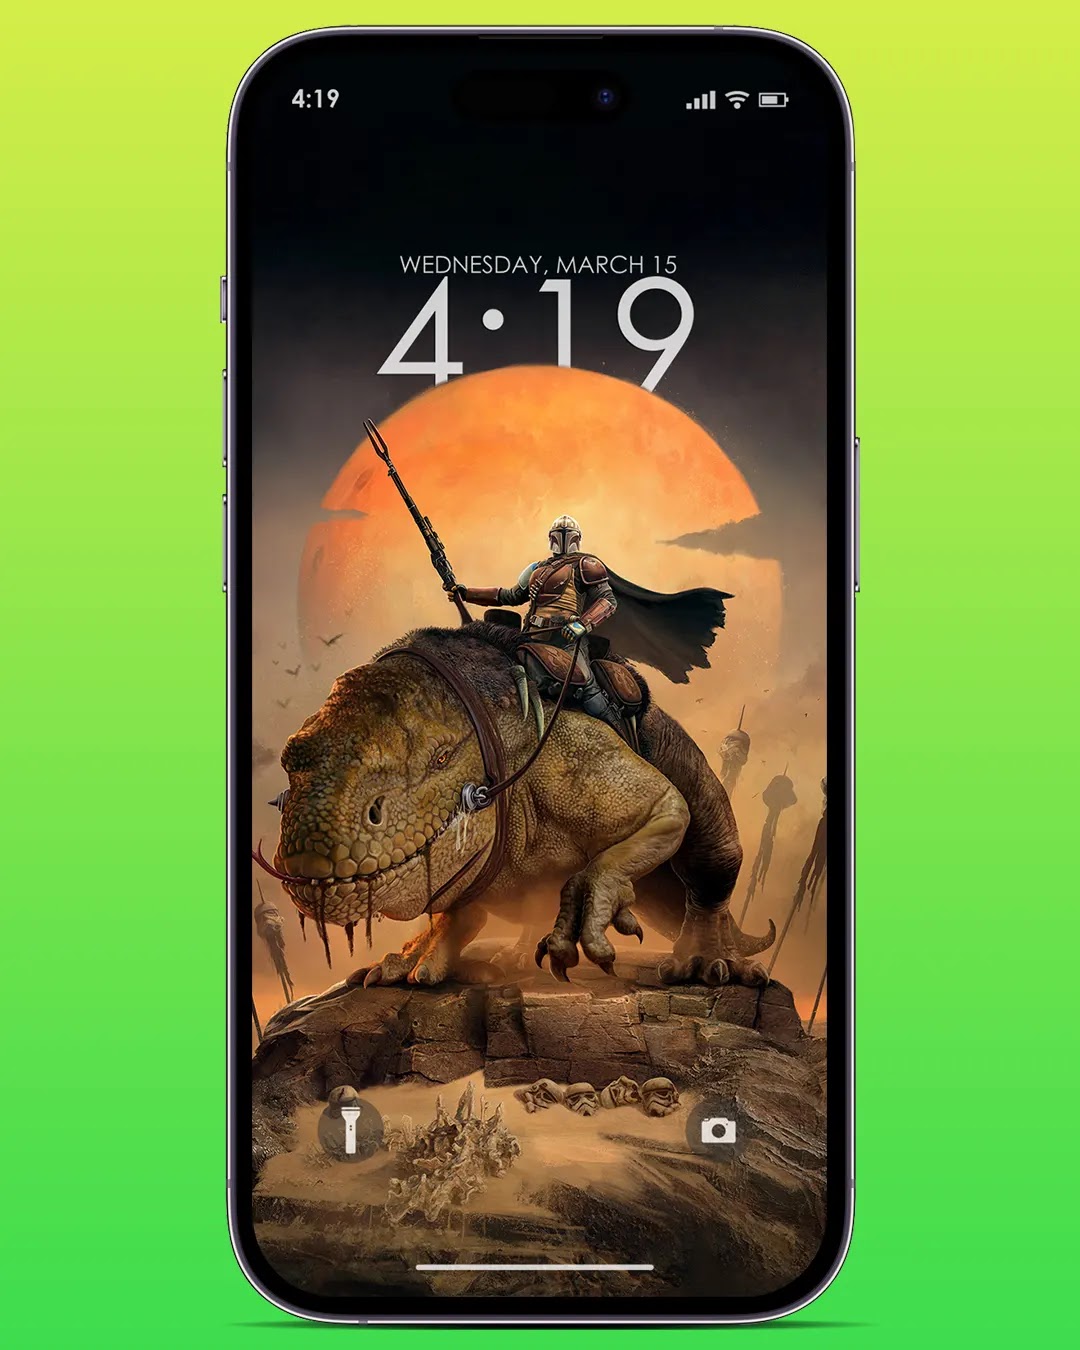 the Mandalorian wallpaper for iphone and android